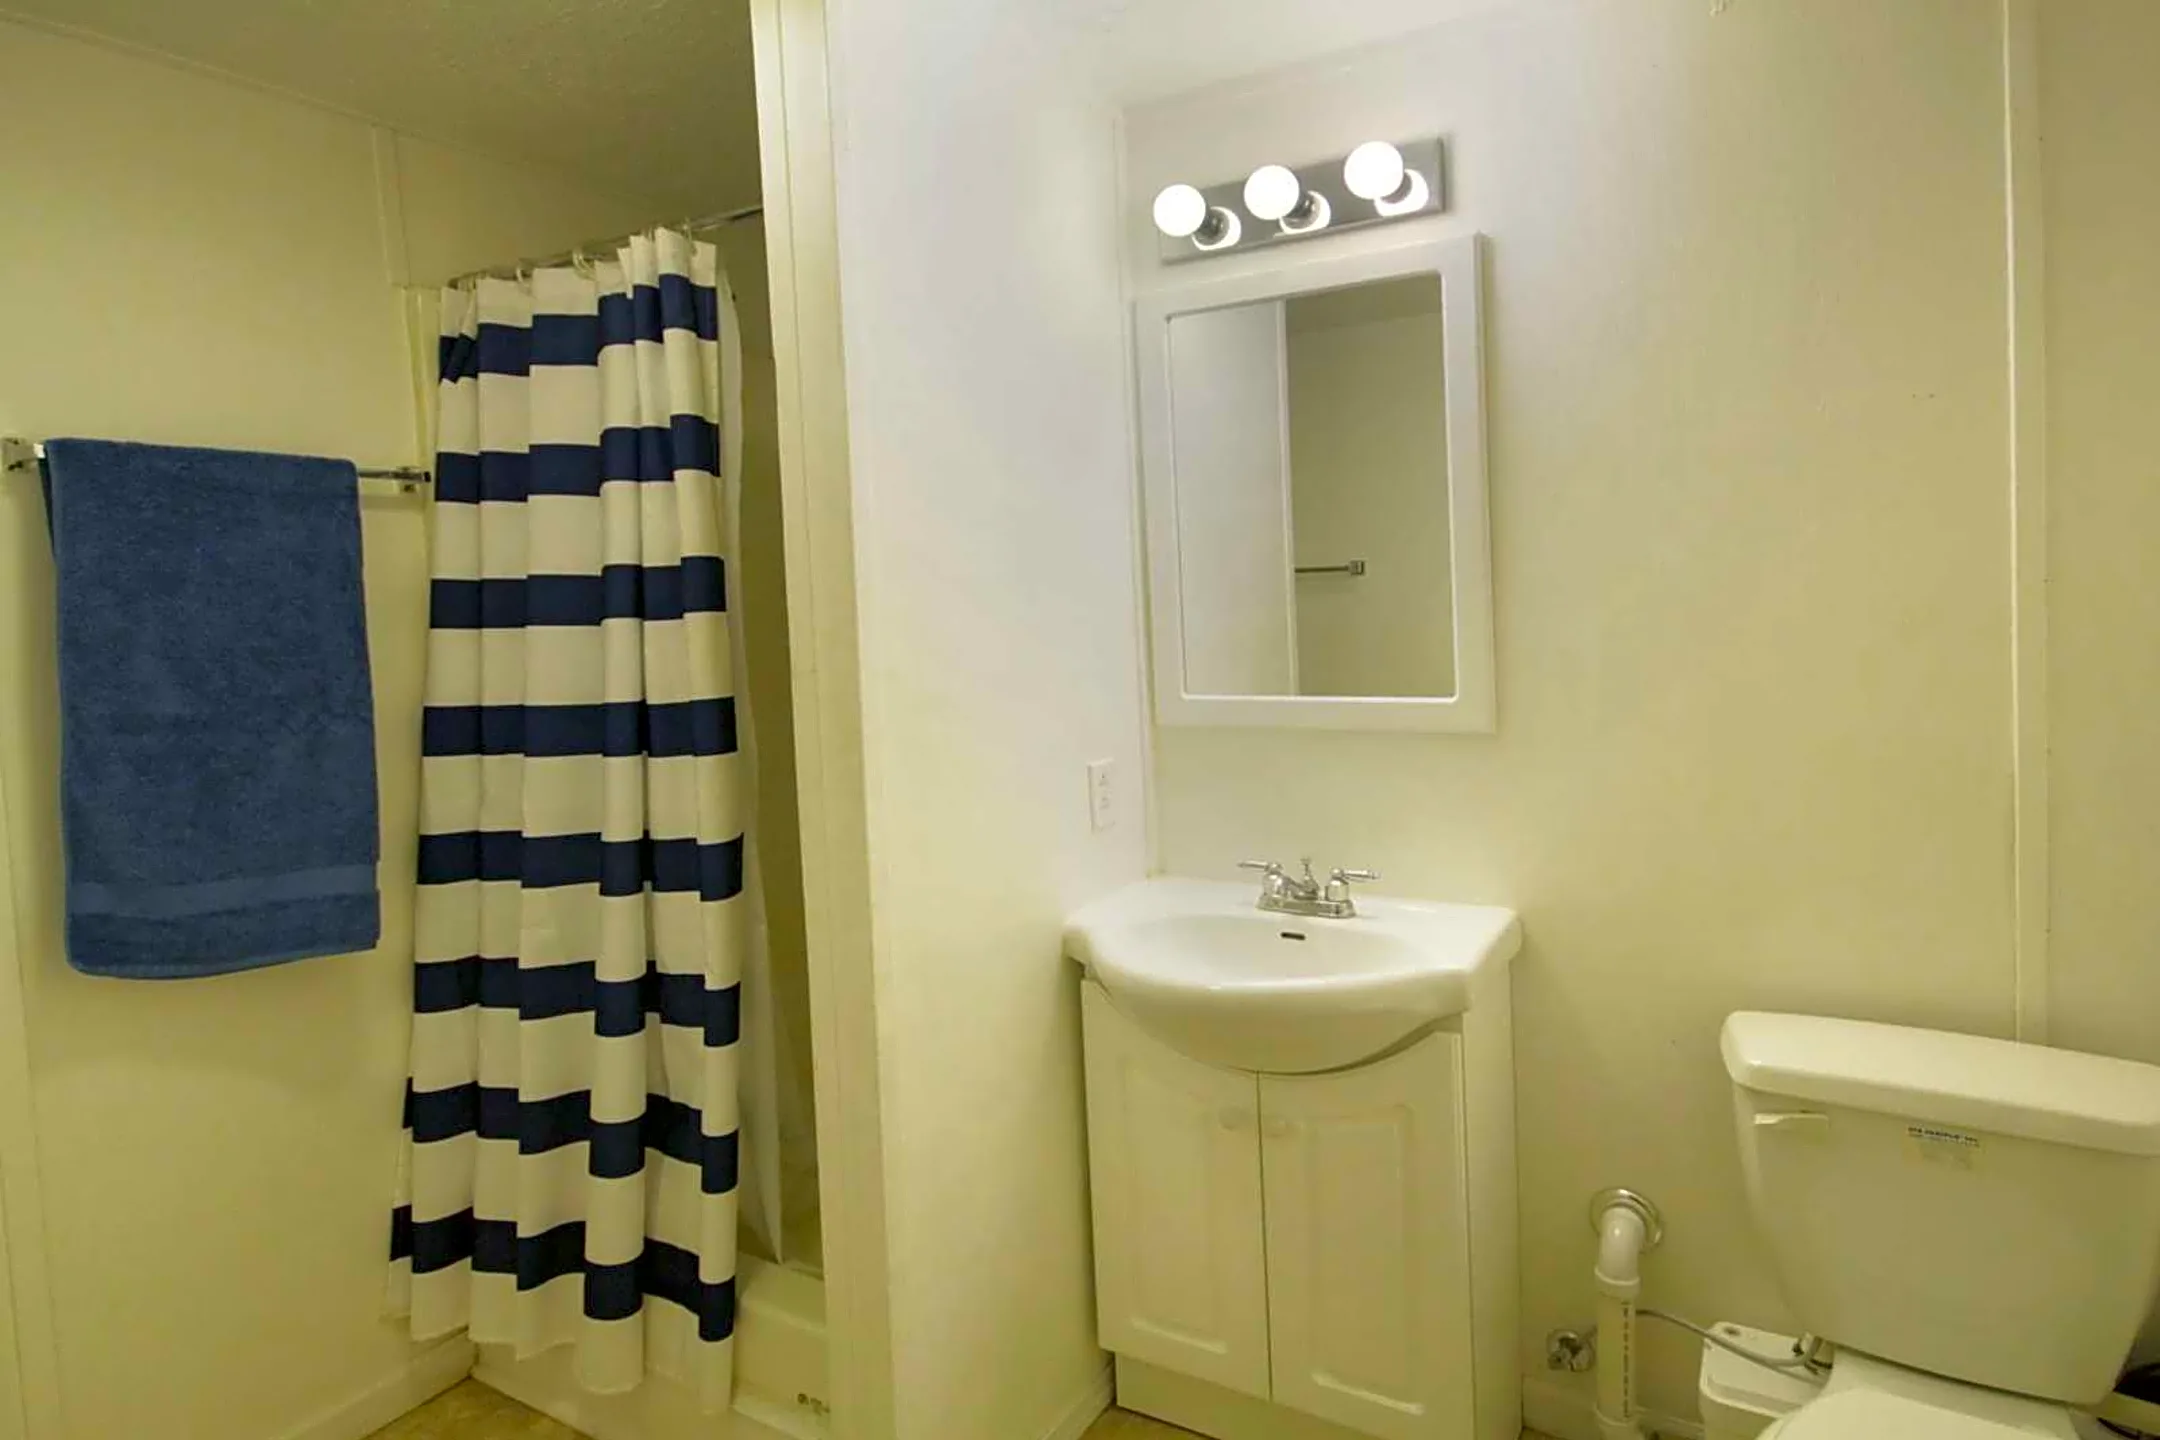 Bathroom - Eddy Street Student Townhomes - South Bend, IN